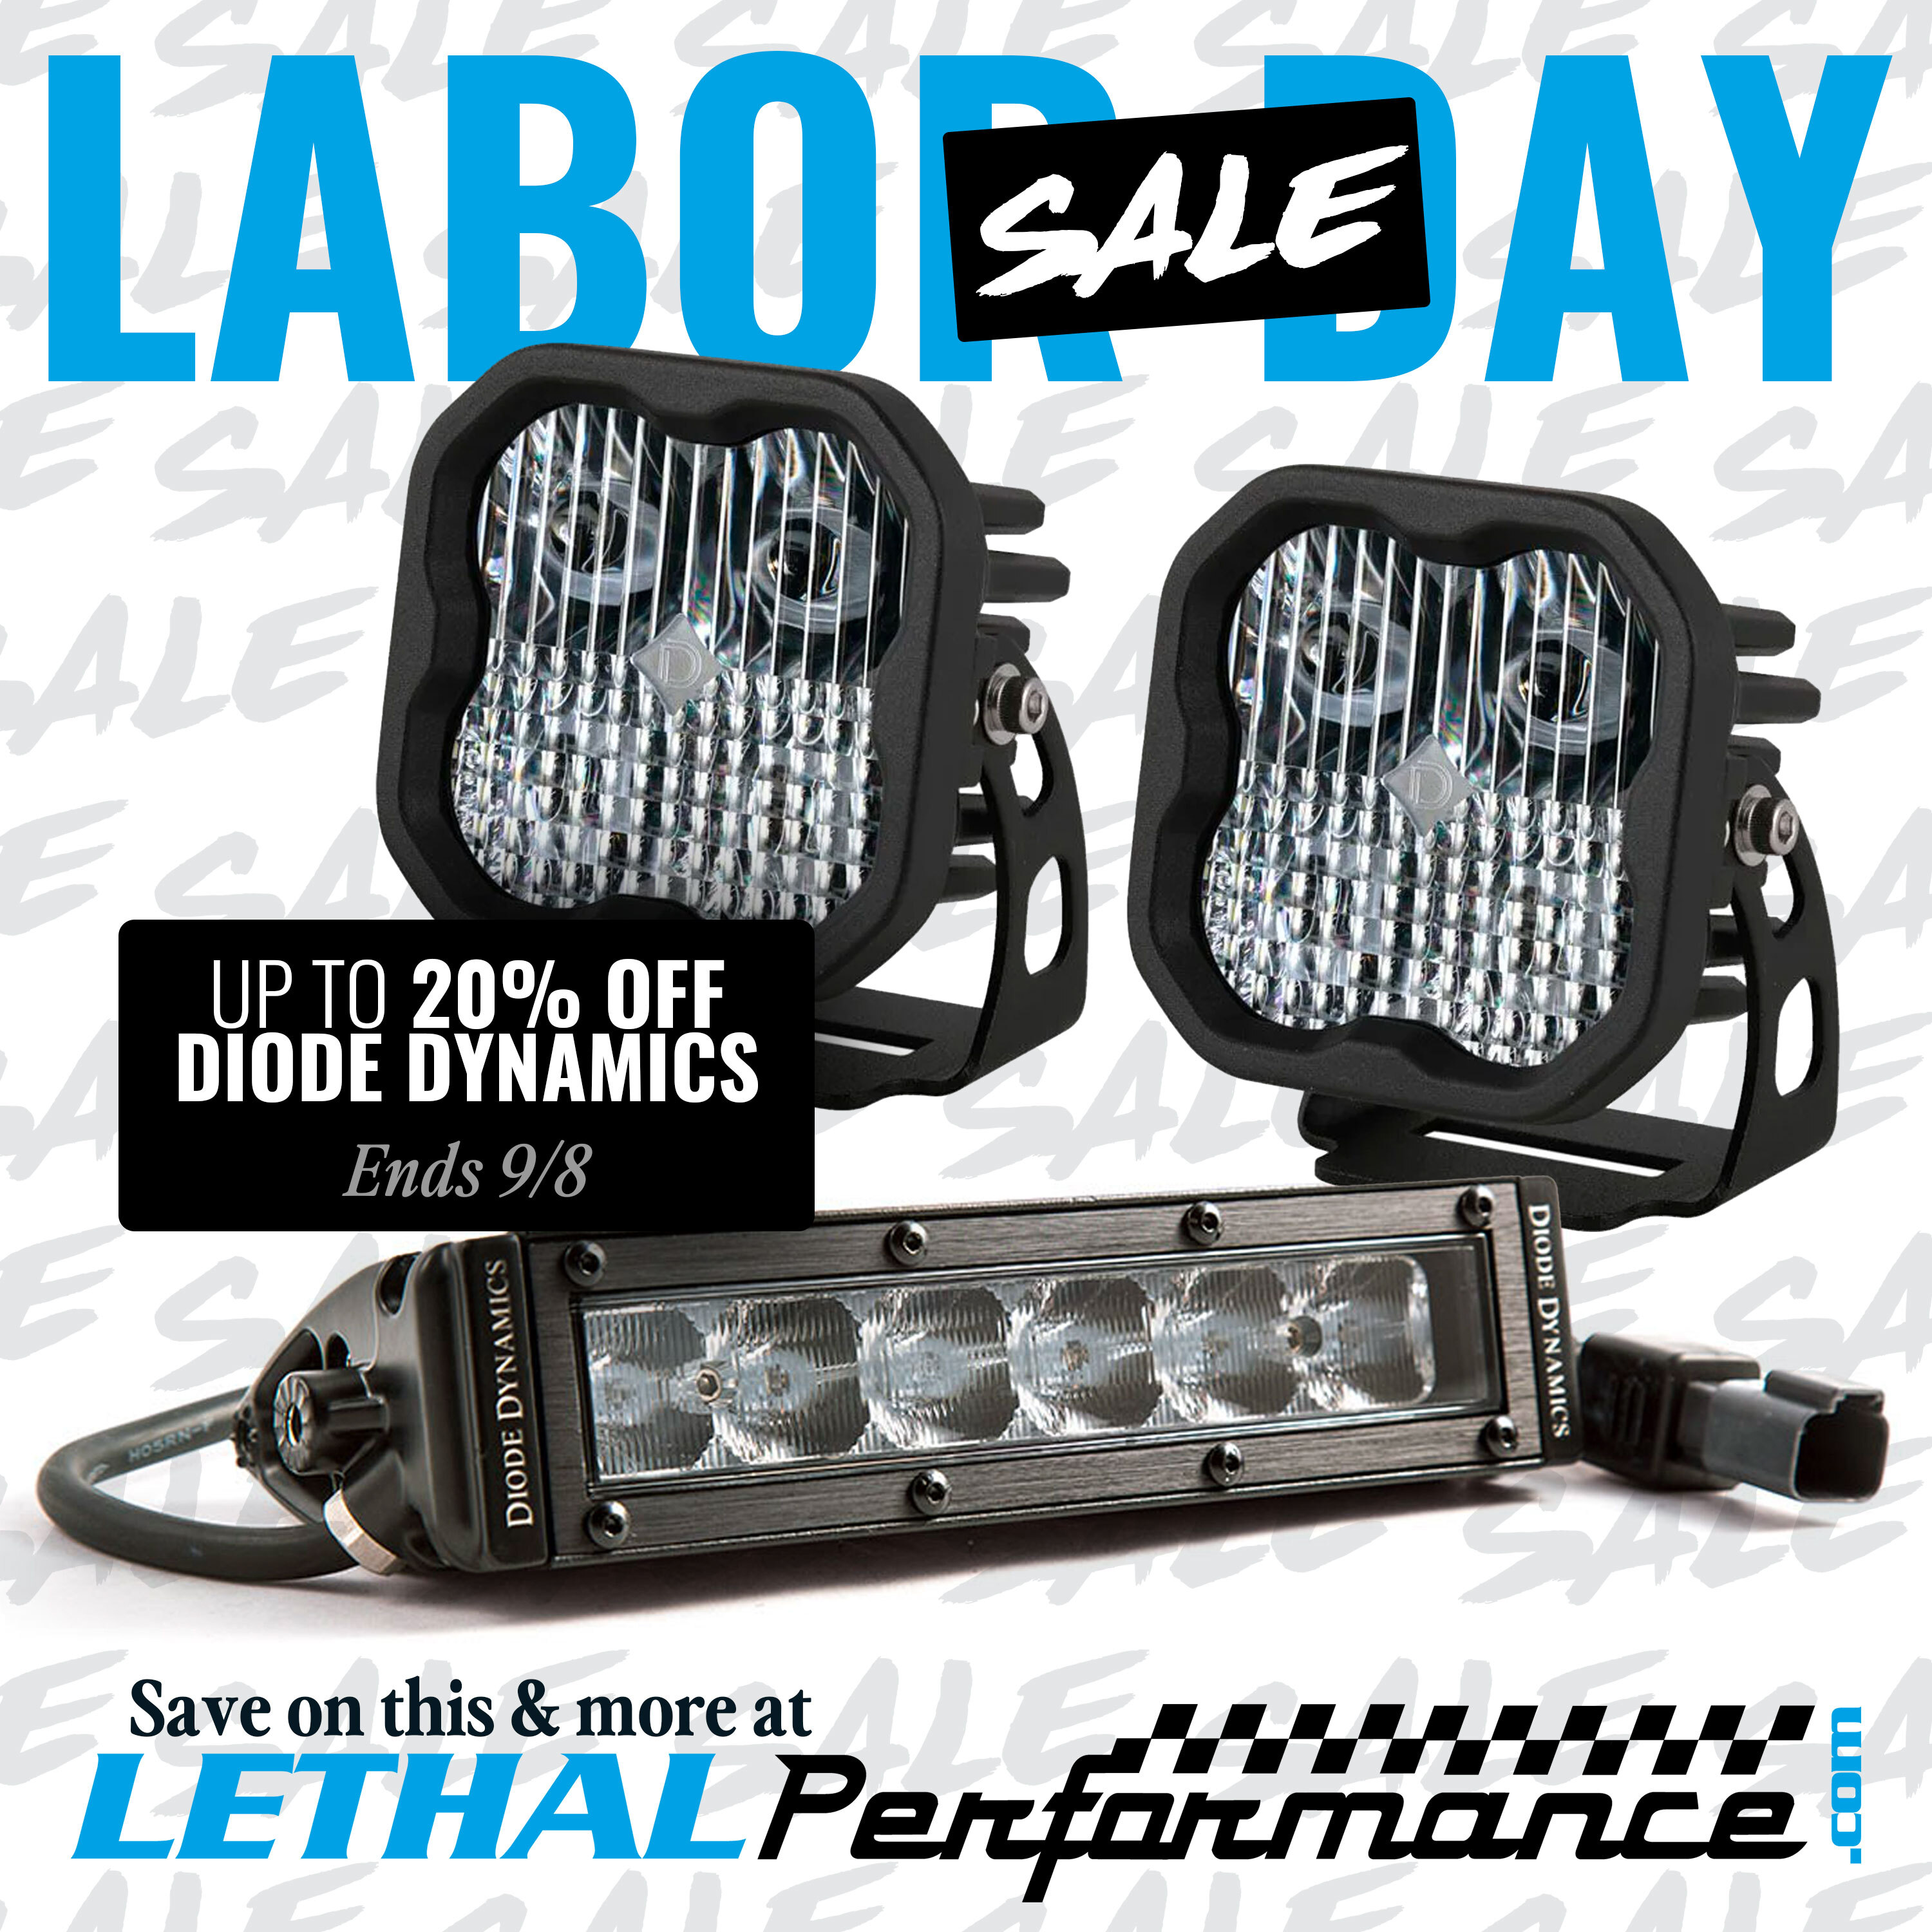 Ford Bronco Labor Day Sales START NOW at Lethal Performance!! diode